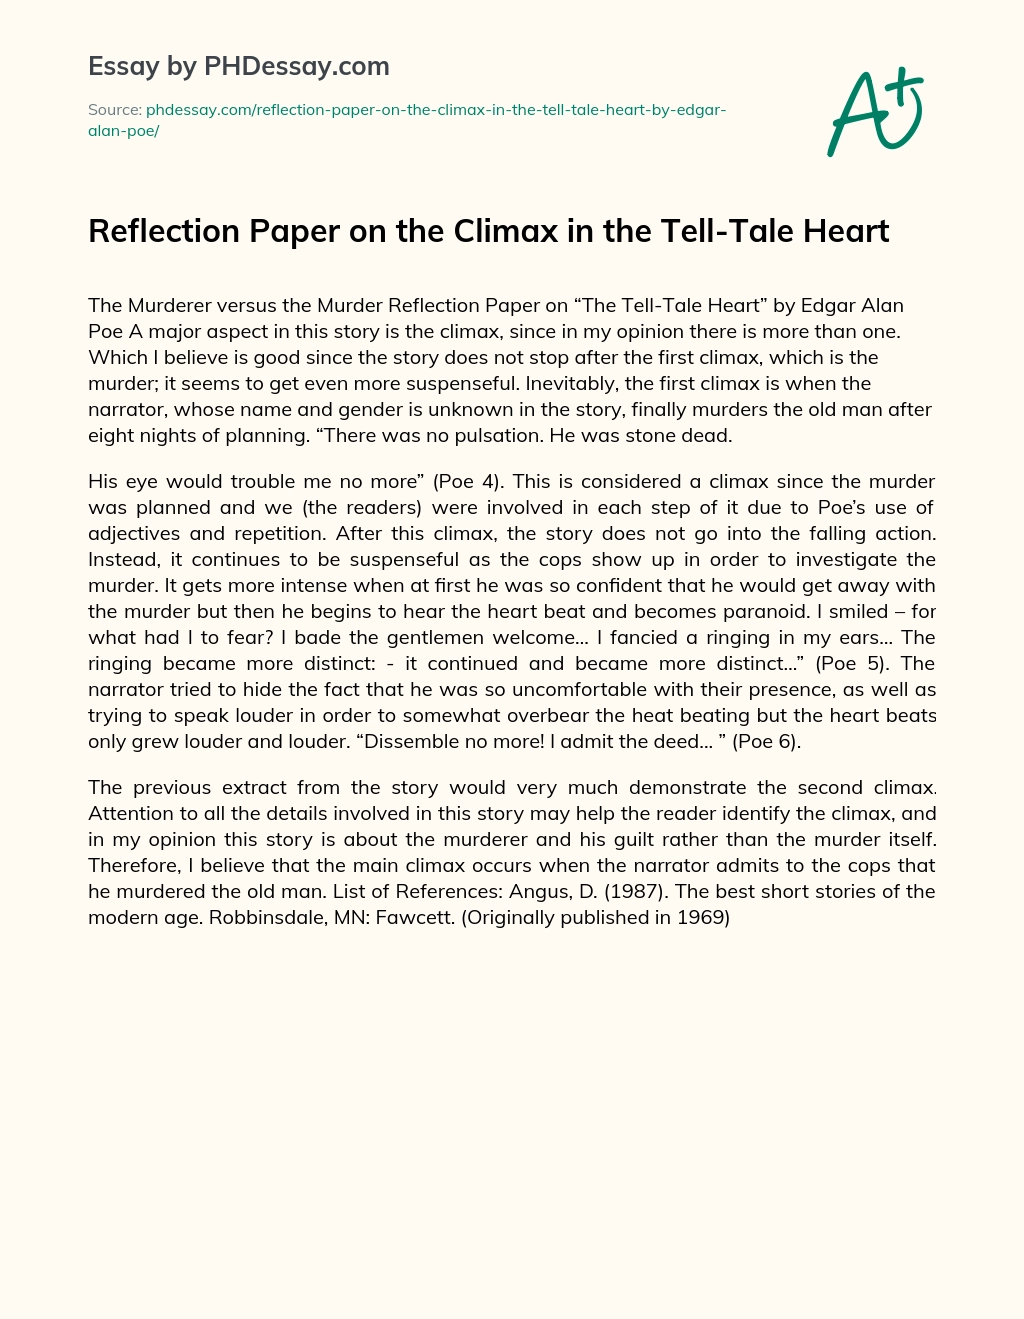 Reflection Paper on the Climax in the Tell-Tale Heart essay